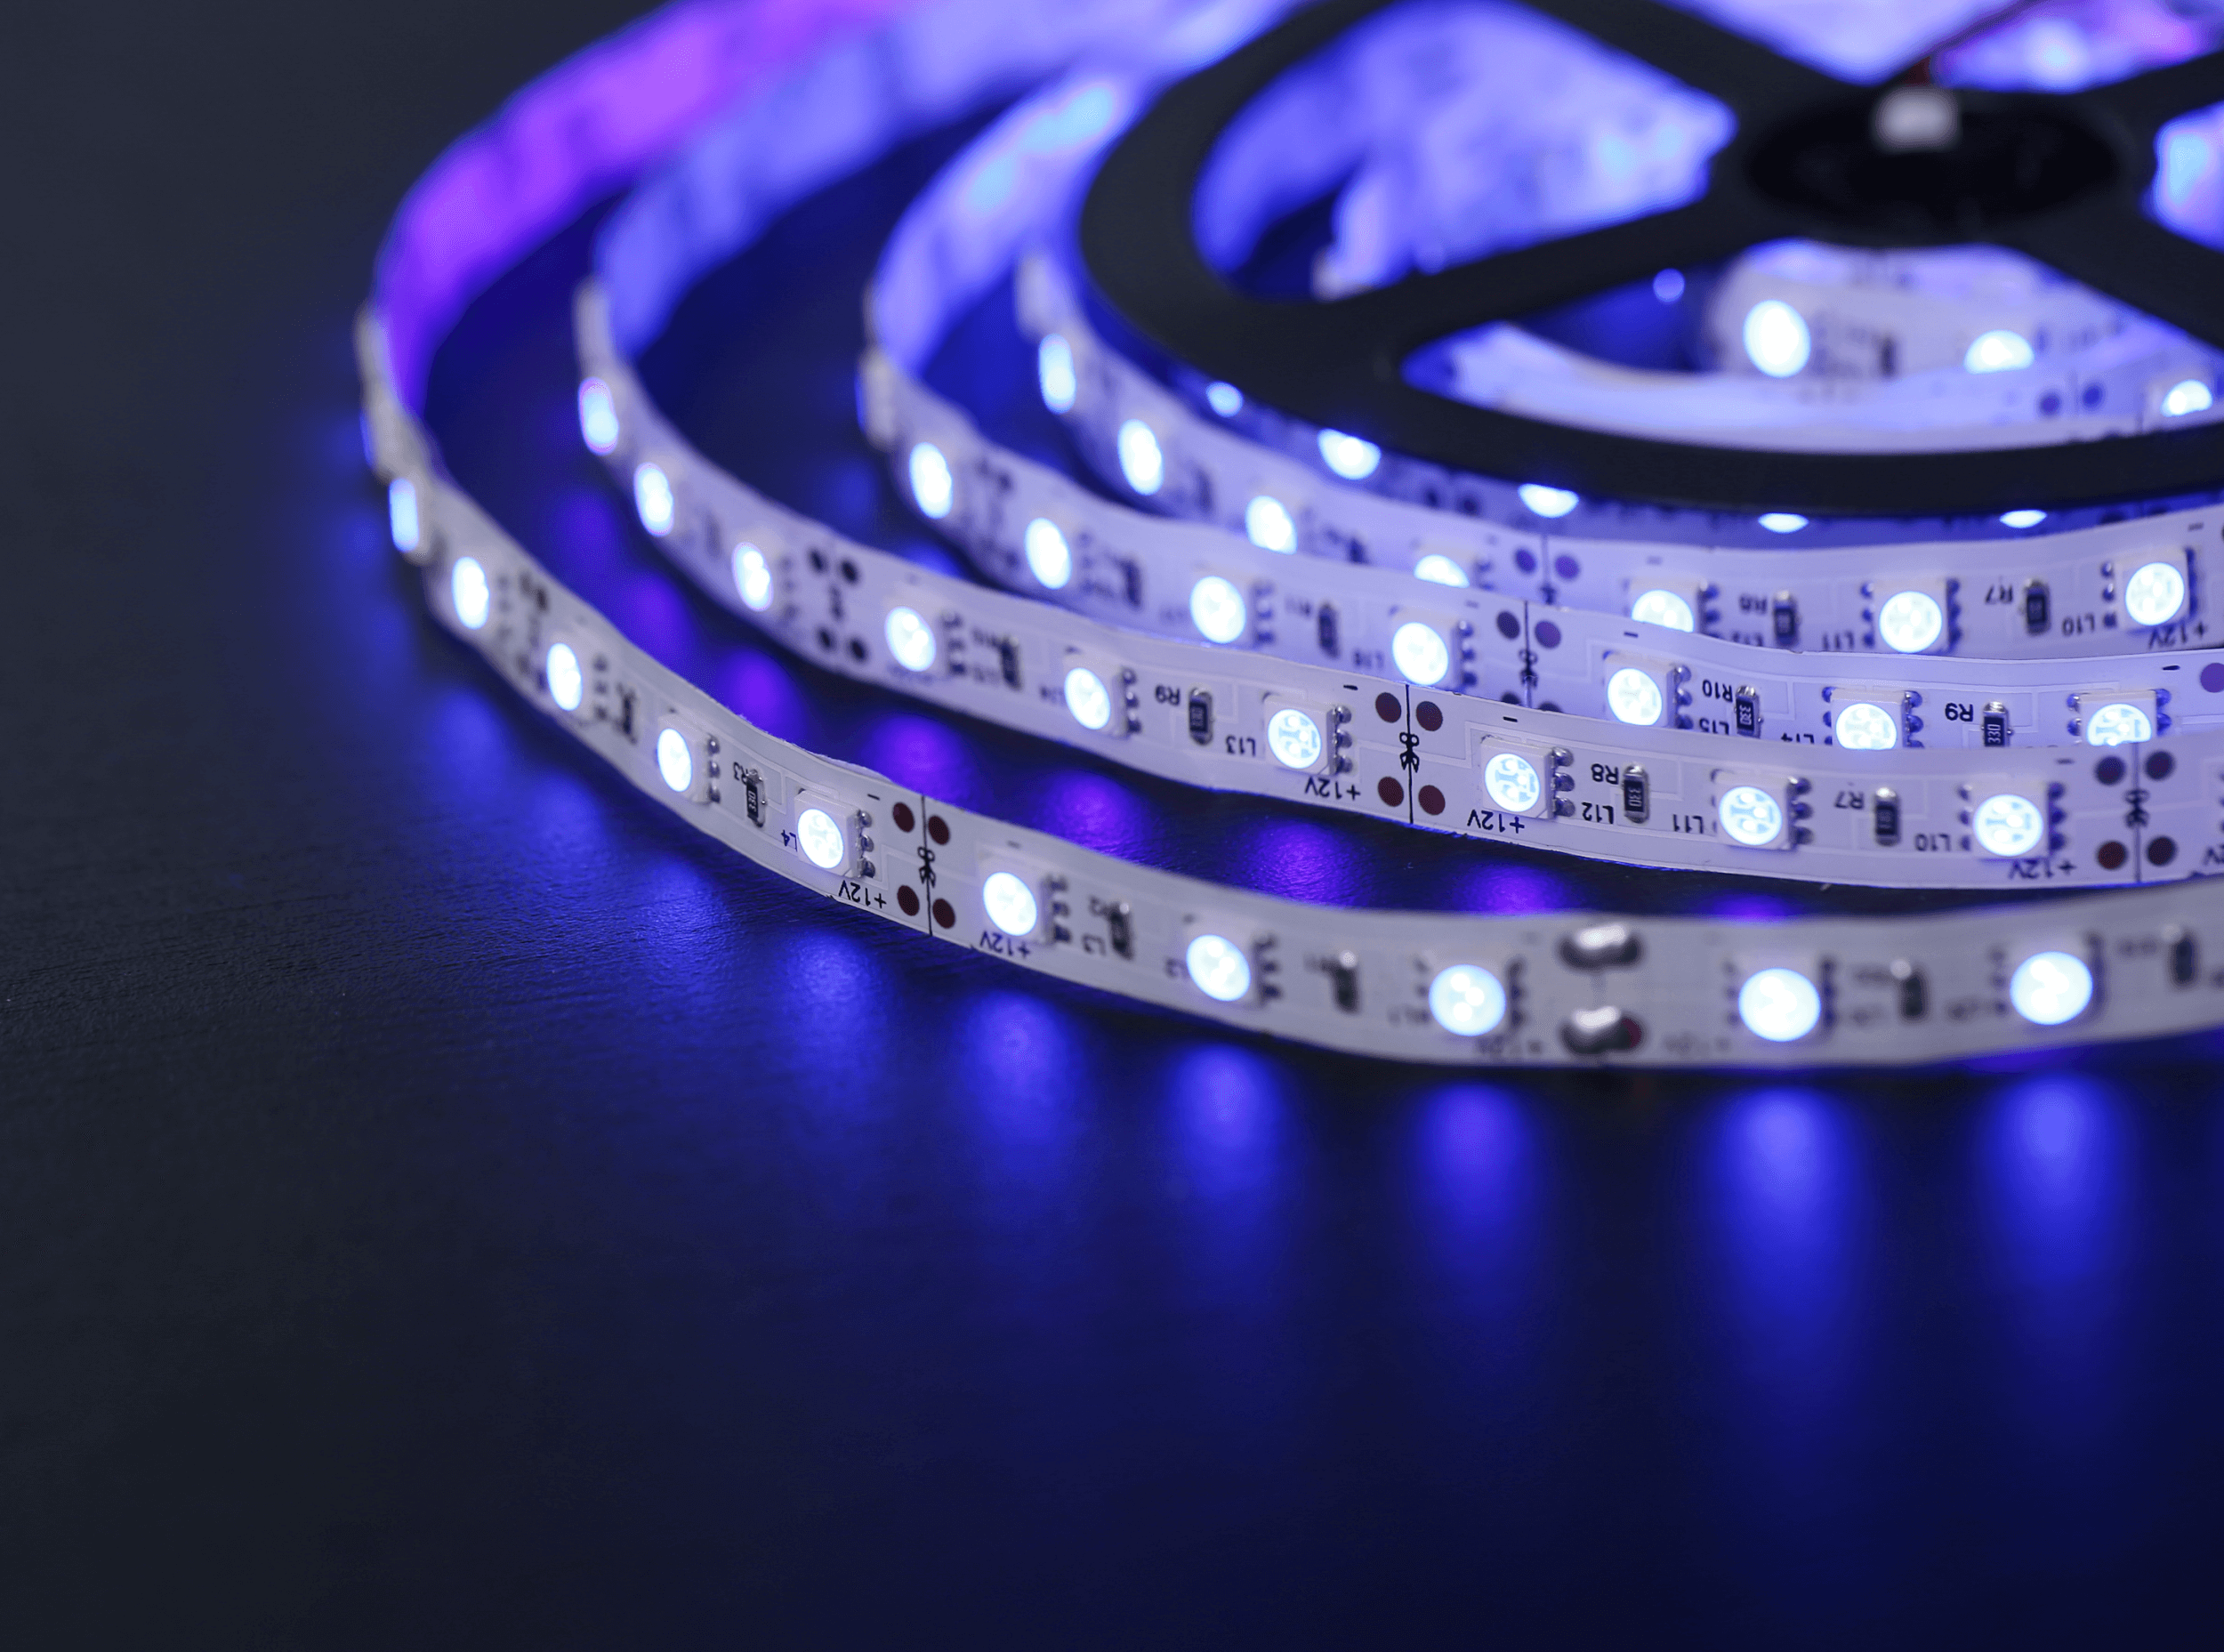 How to Control LED Strips? An Easy Guide